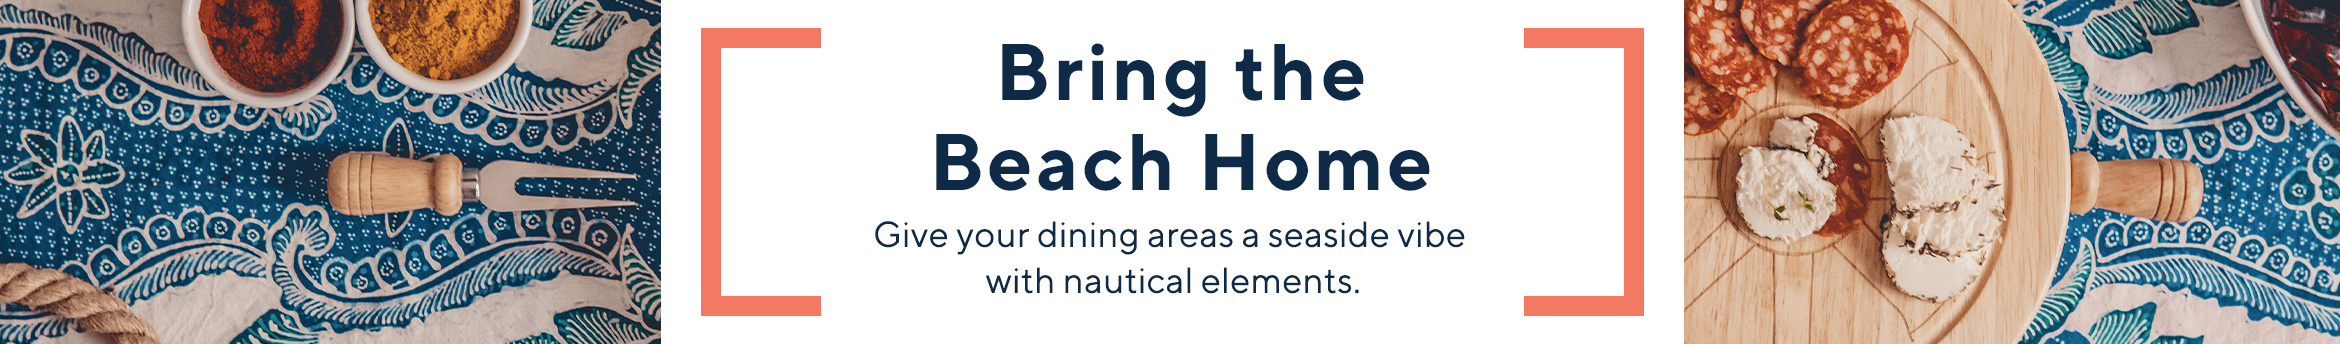 Bring the Beach Home  Give your dining areas a seaside vibe with nautical elements.